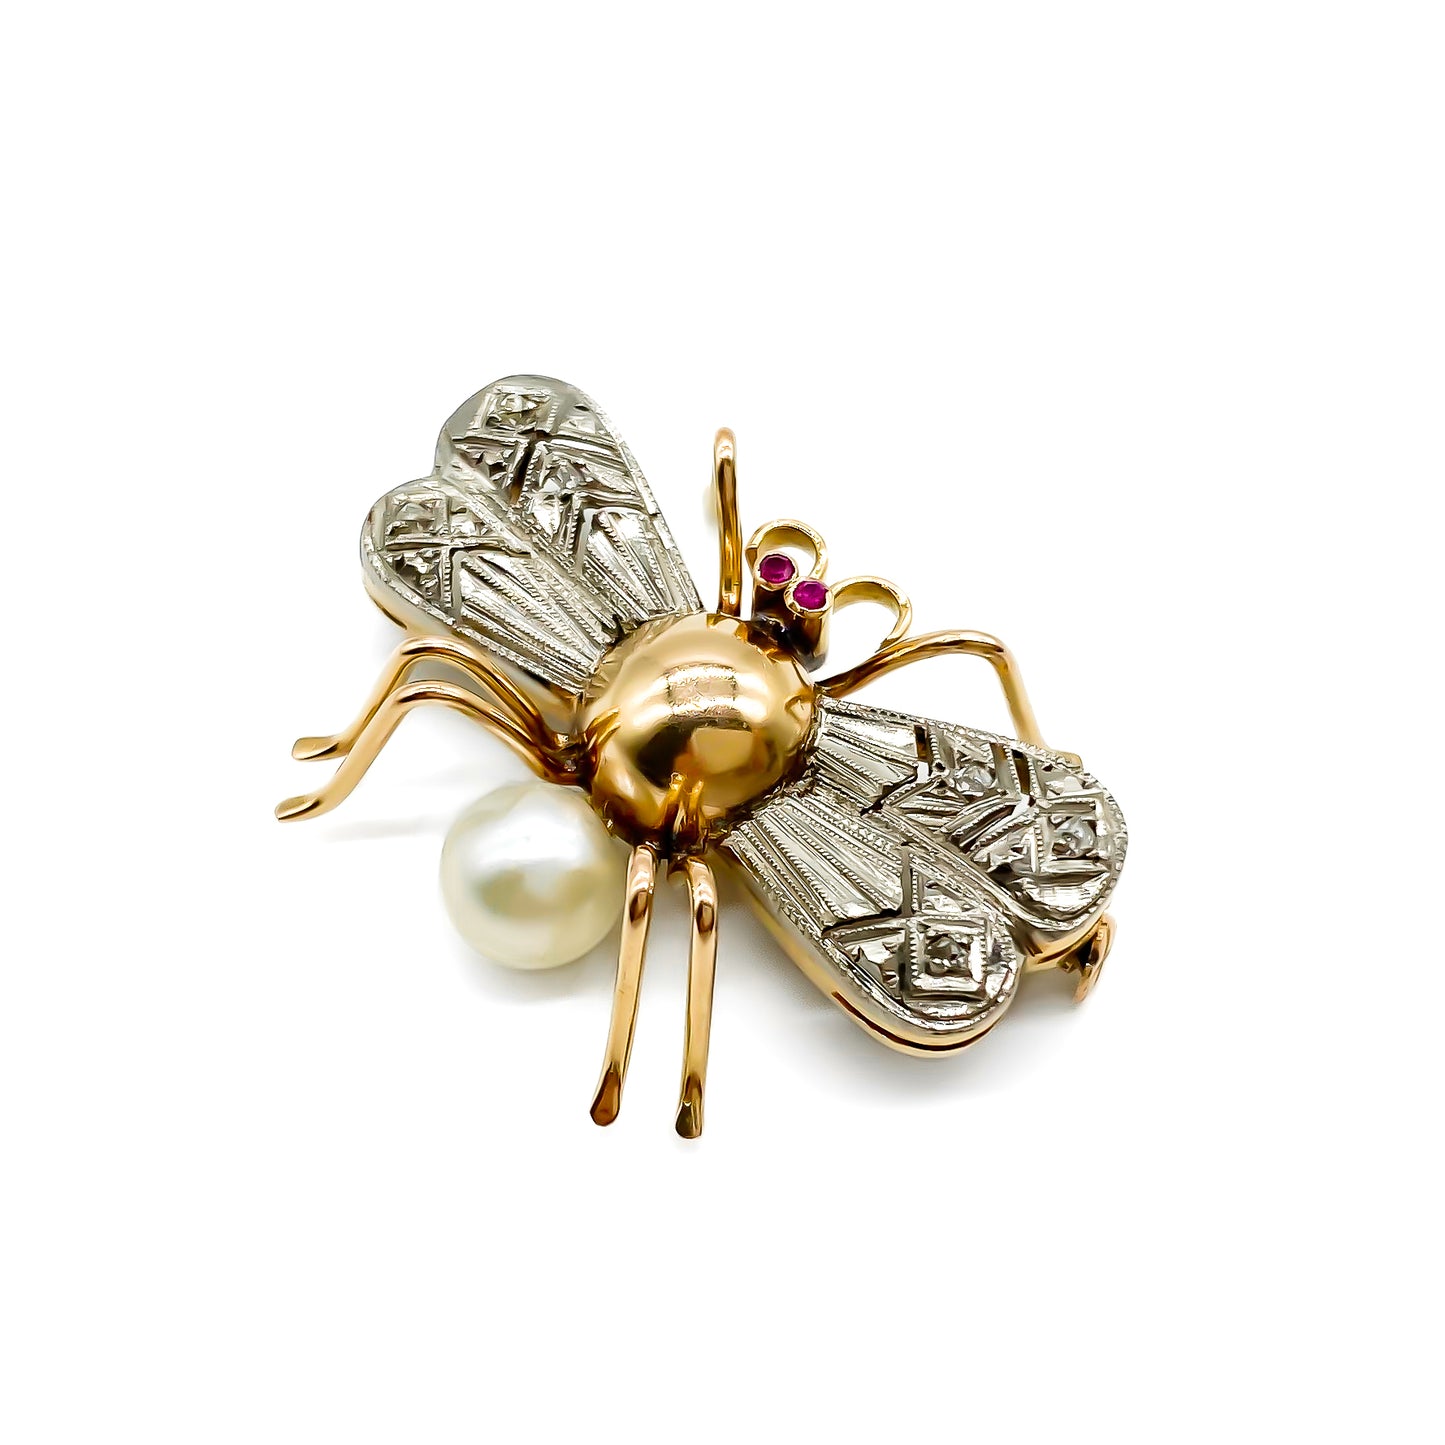 Charming 18ct white and rose gold insect brooch with diamond encrusted wings, ruby eyes and a pearl abdomen. 